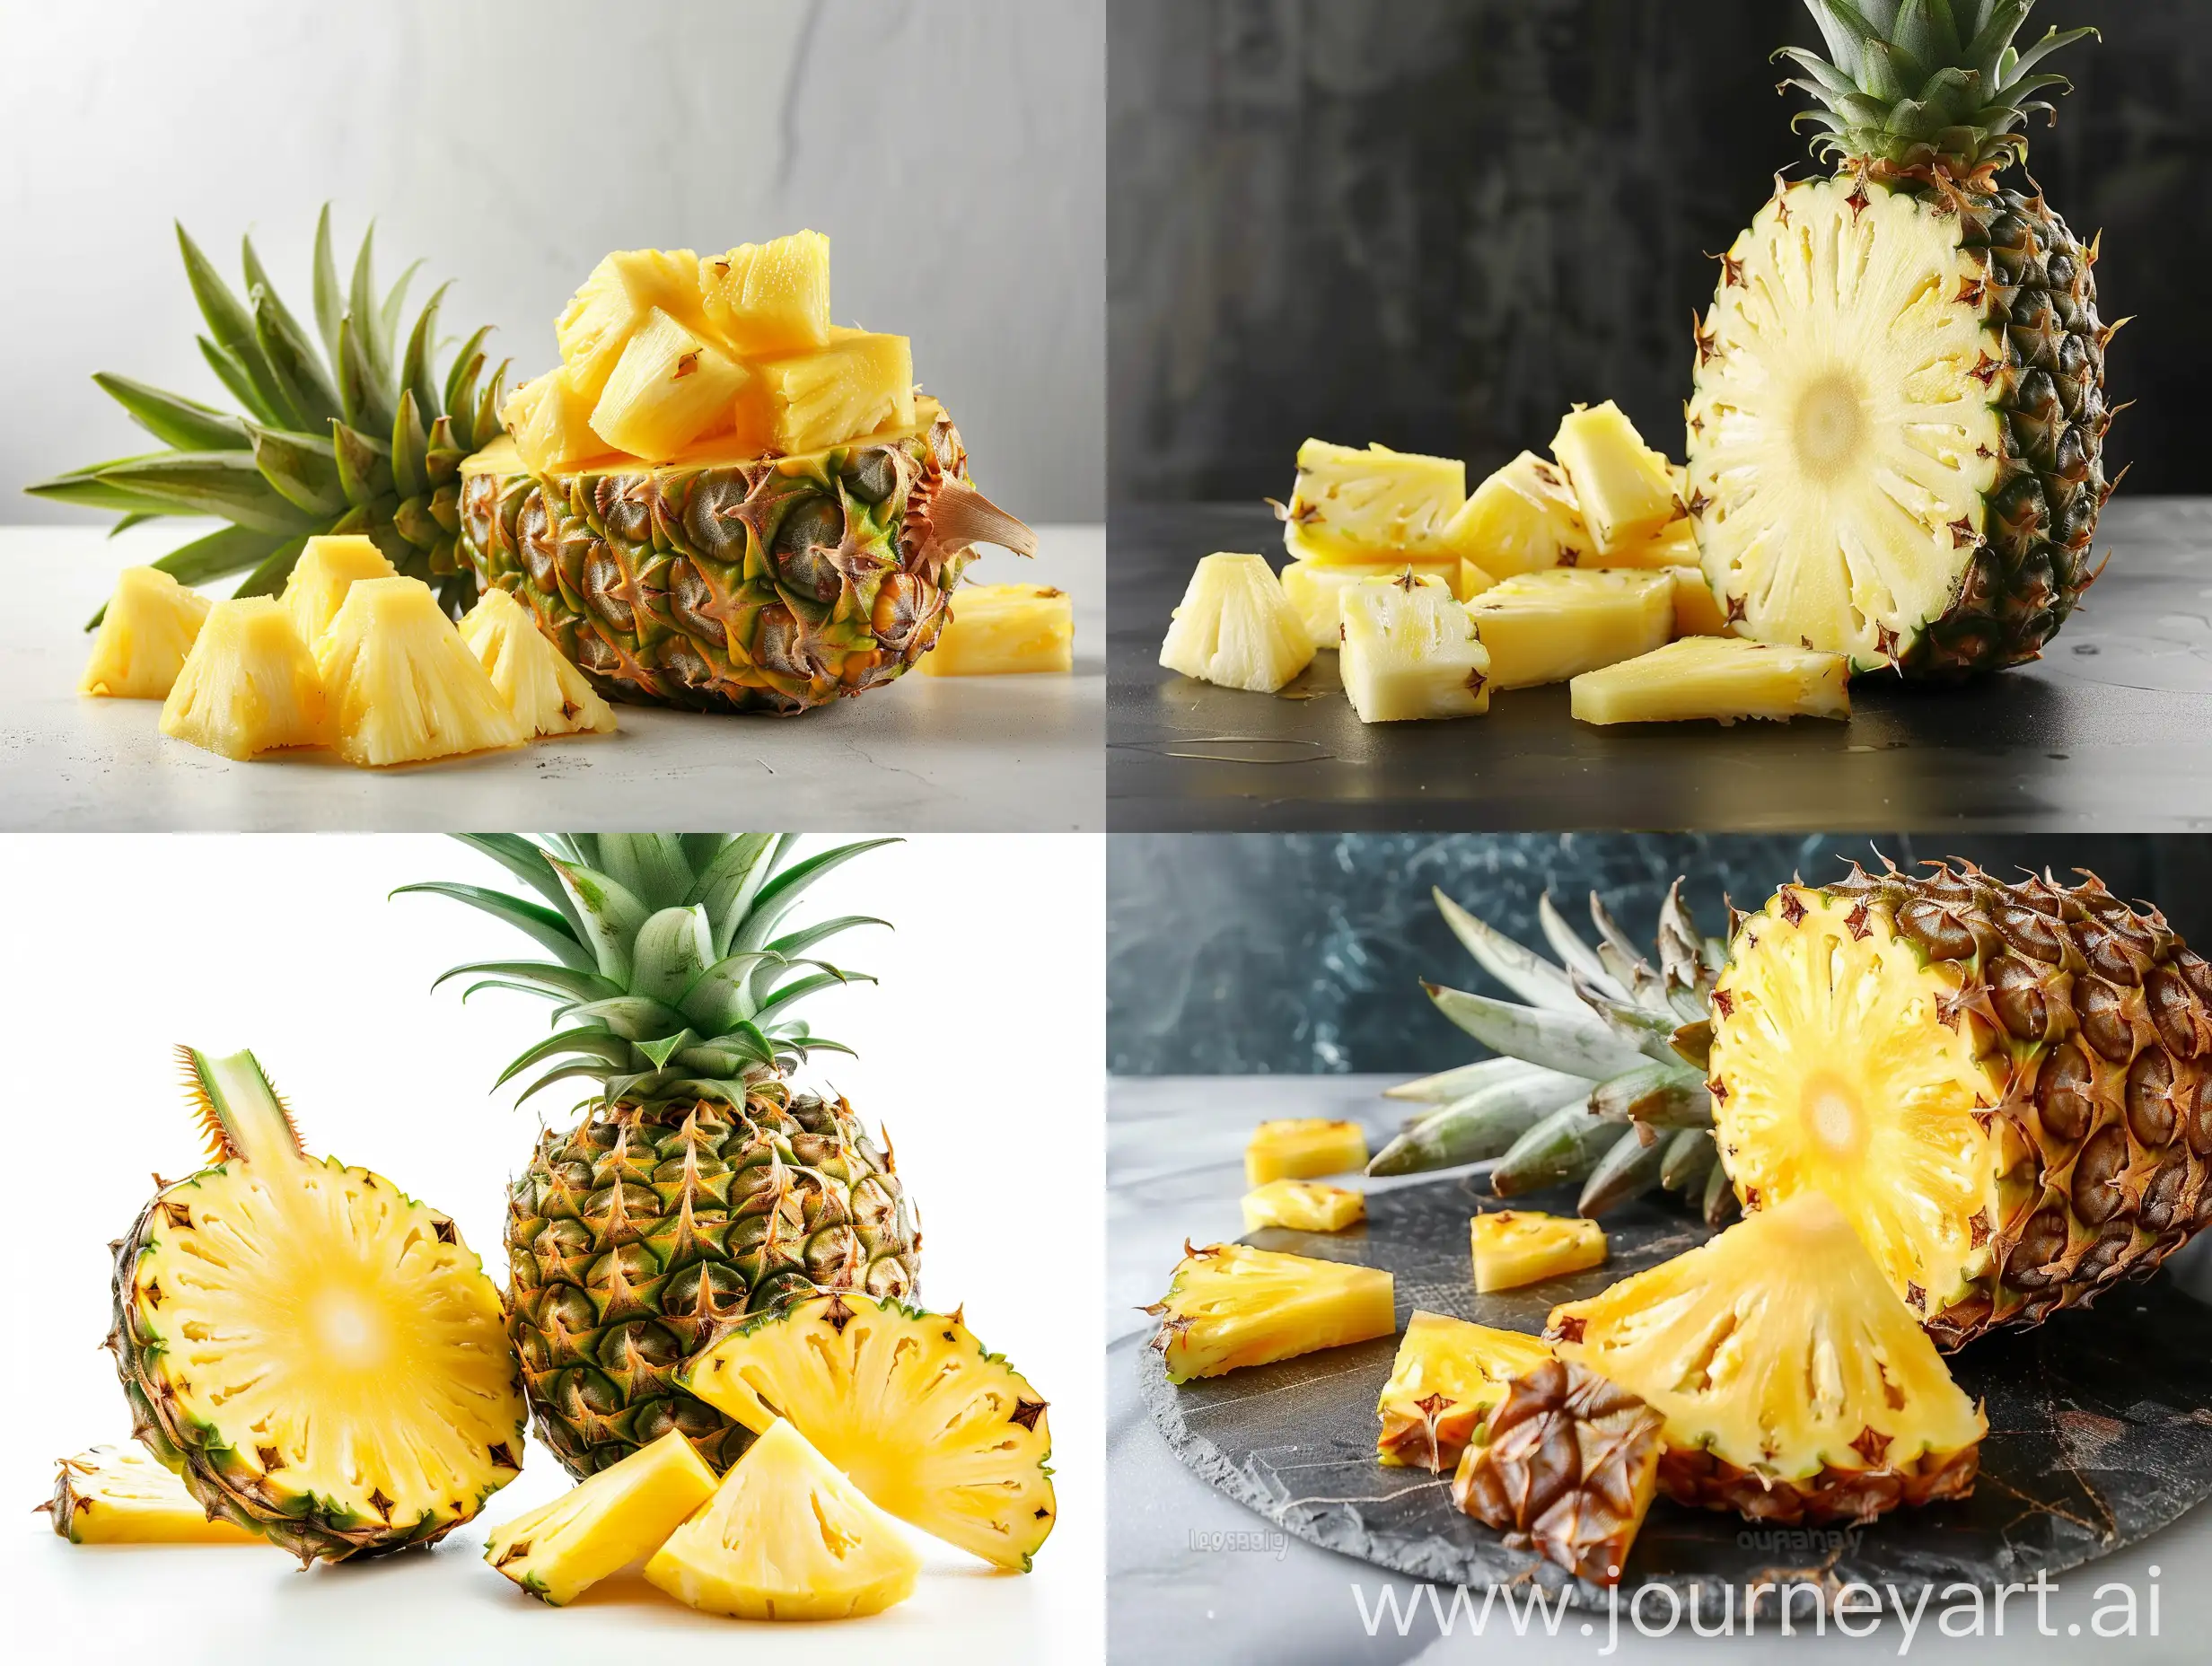 Real promotional photo of pineapple and pieces of pineapple